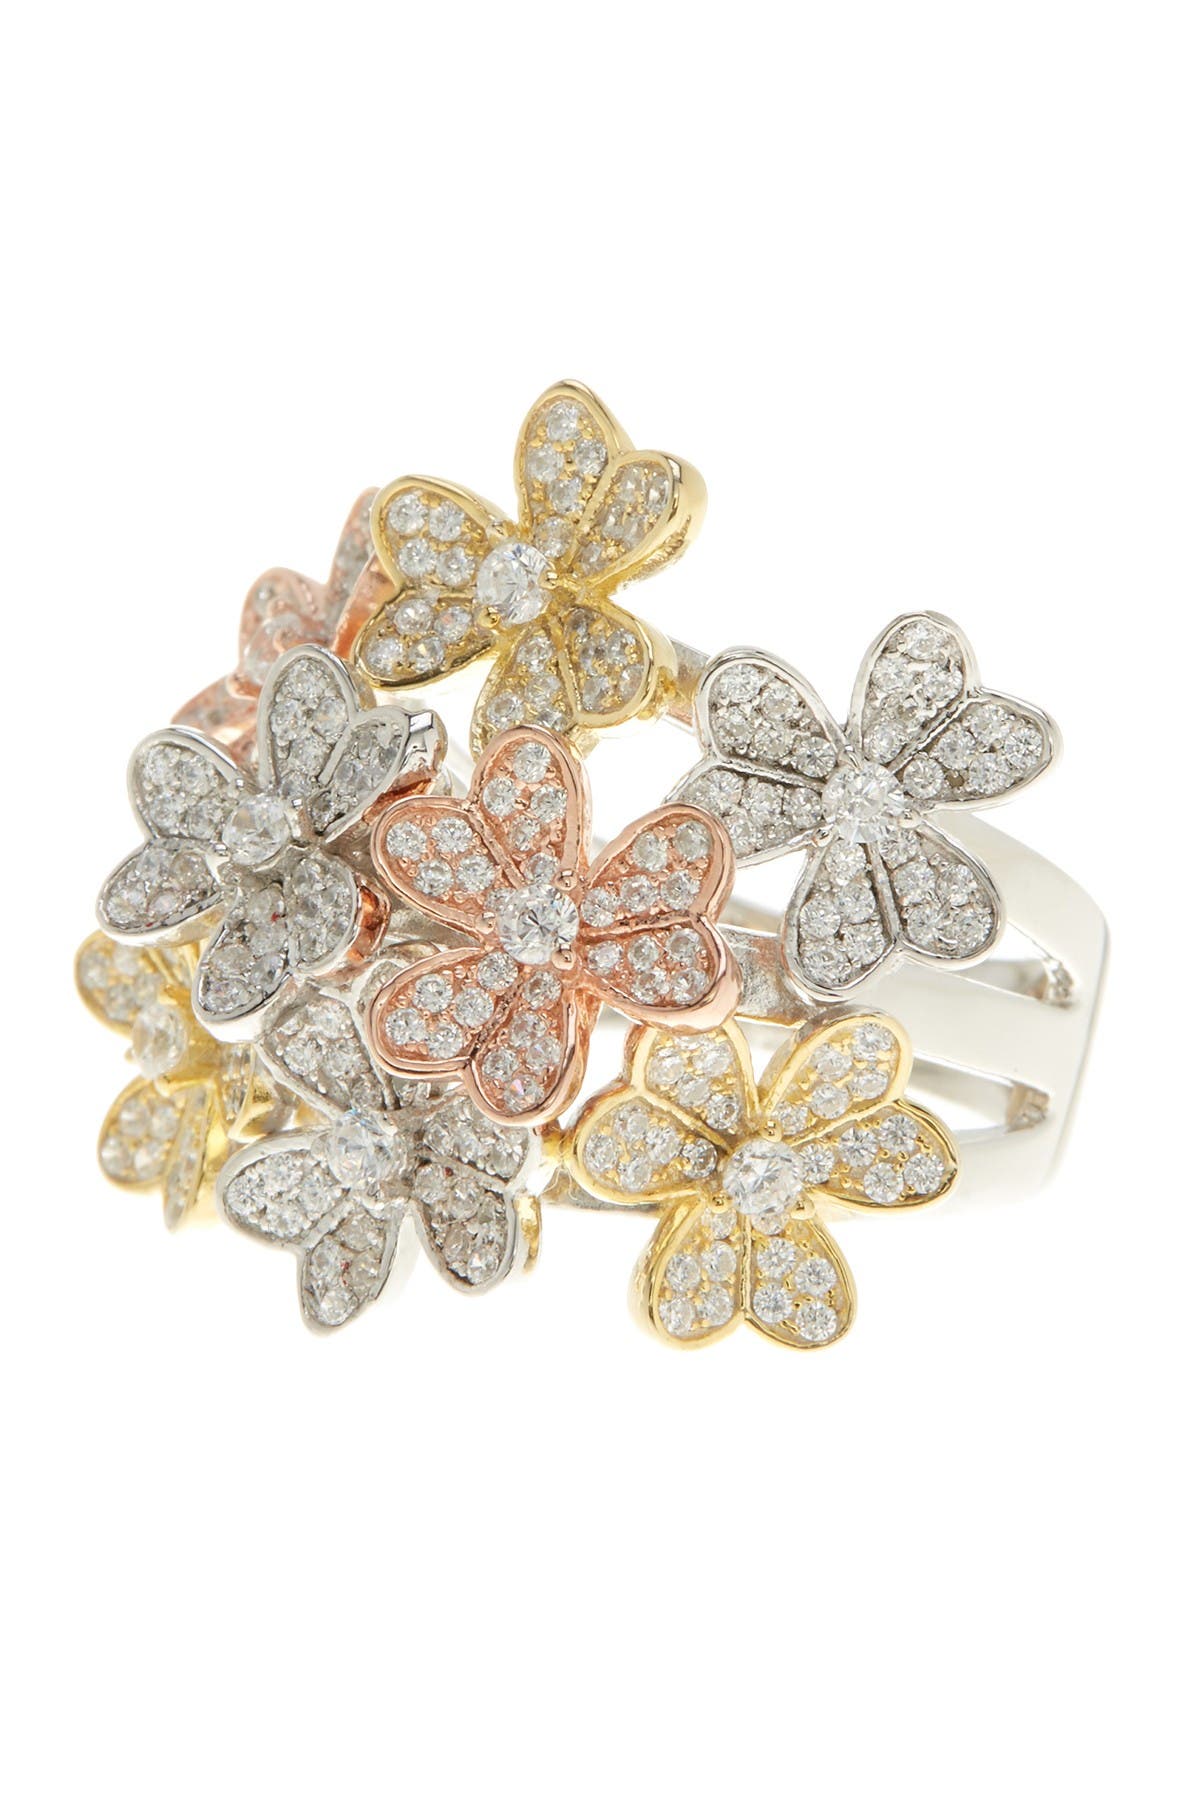 Size 9 Tri Color Gold Plated Sterling Silver CZ Floral Womens Ring